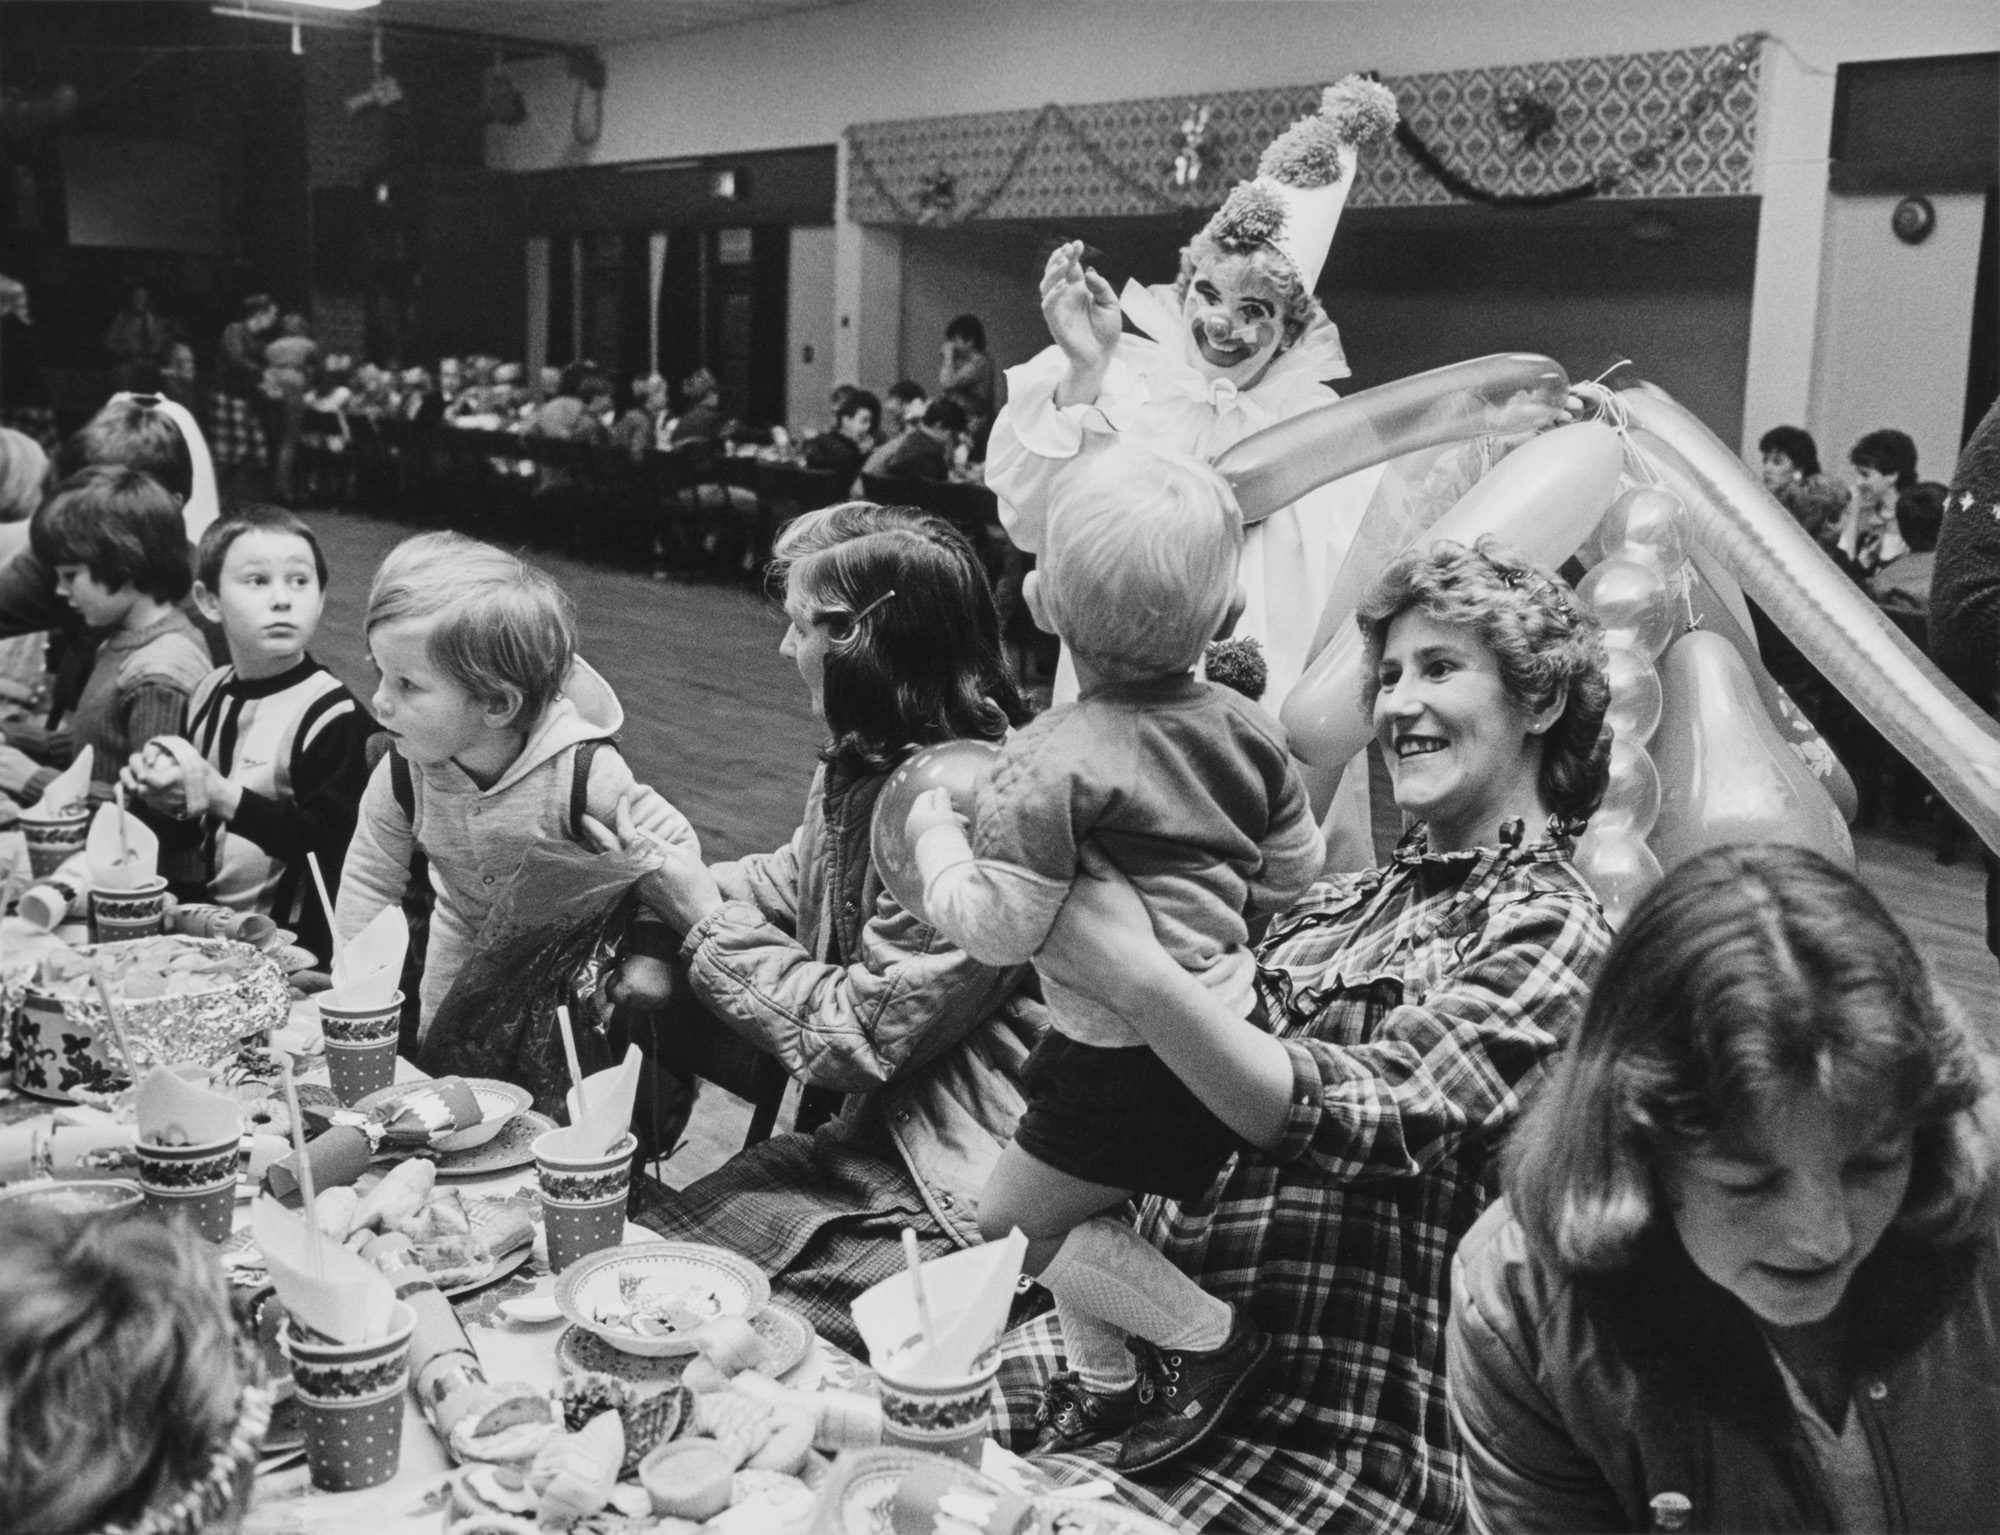 Black and white photograph showing parents and children of striking miners eating party food from long tables inside a hall